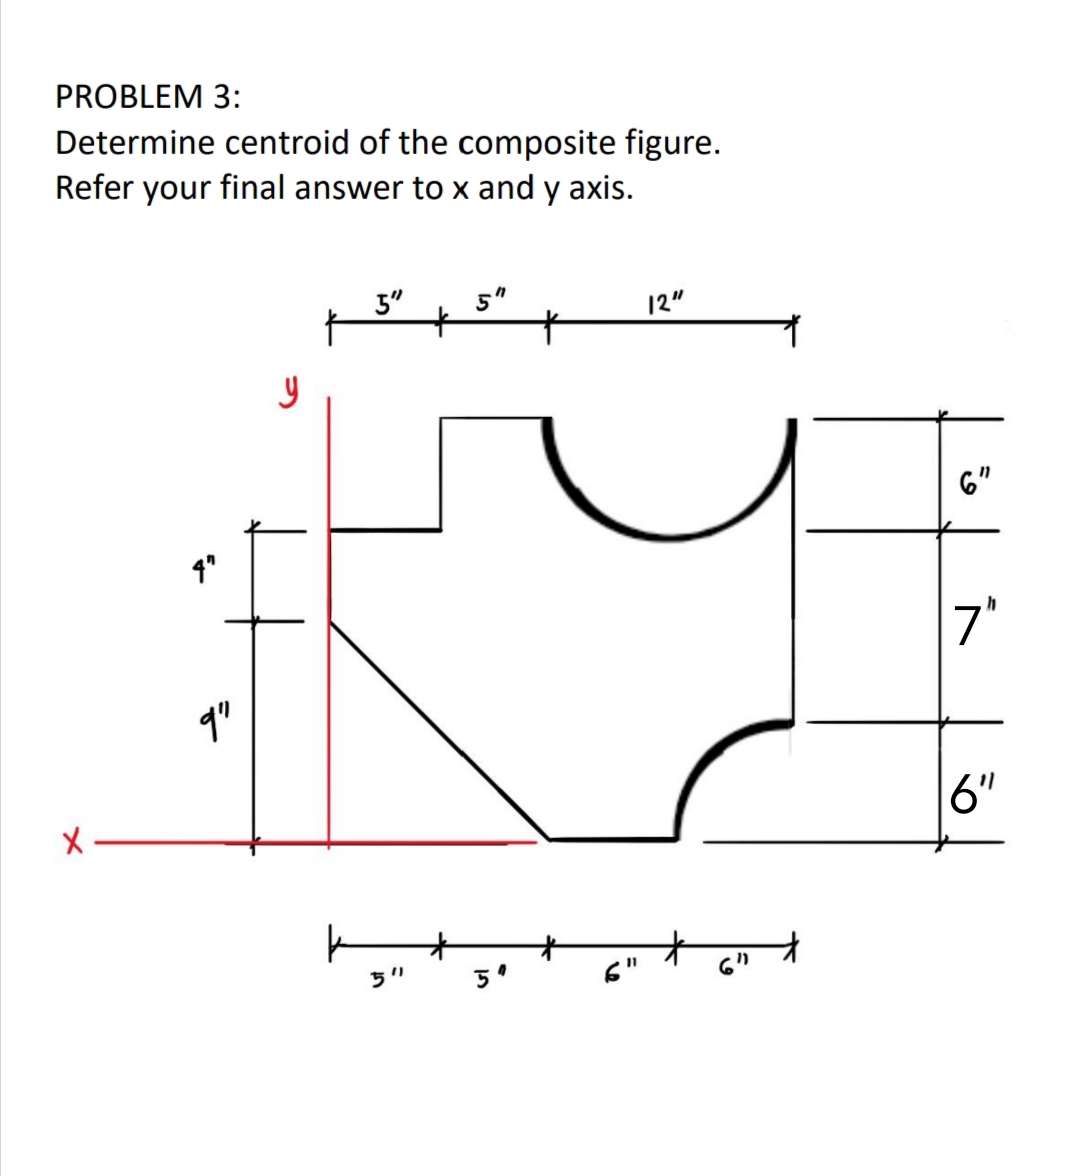 PROBLEM 3:
Determine centroid of the composite figure.
Refer your final answer to x and y axis.
3"
12"
6"
4"
7'
6"
6"
6"
